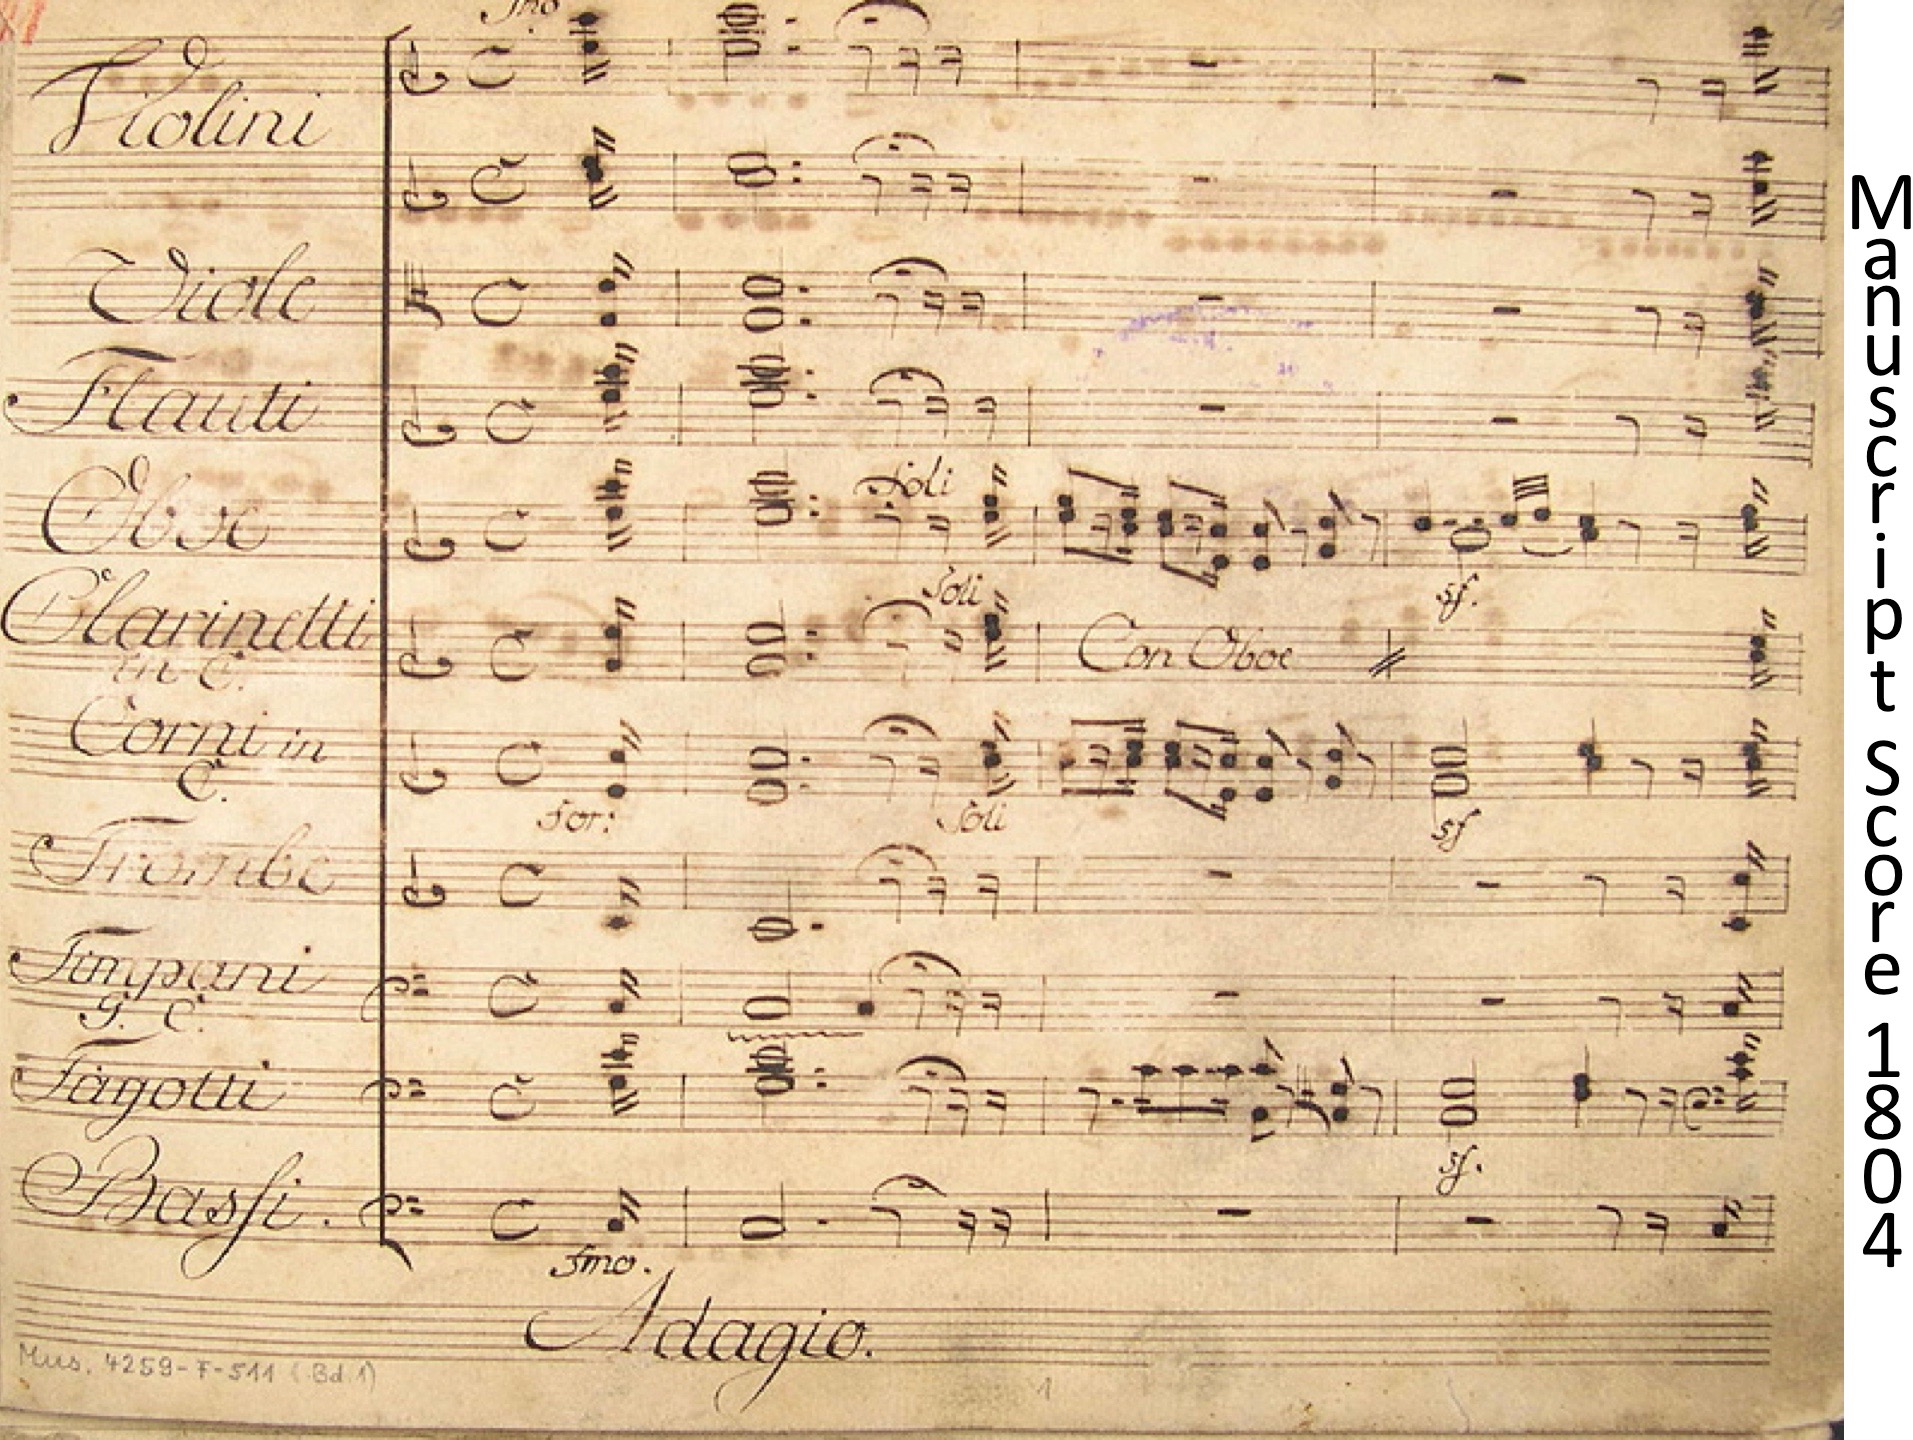 Photo of the yellowed parchment manuscript with the first four bars of music notation for the orchestra for the overture to Ferdinando Paer's 1804 opera Leonora, which is the basis for A Roadkill Opera.